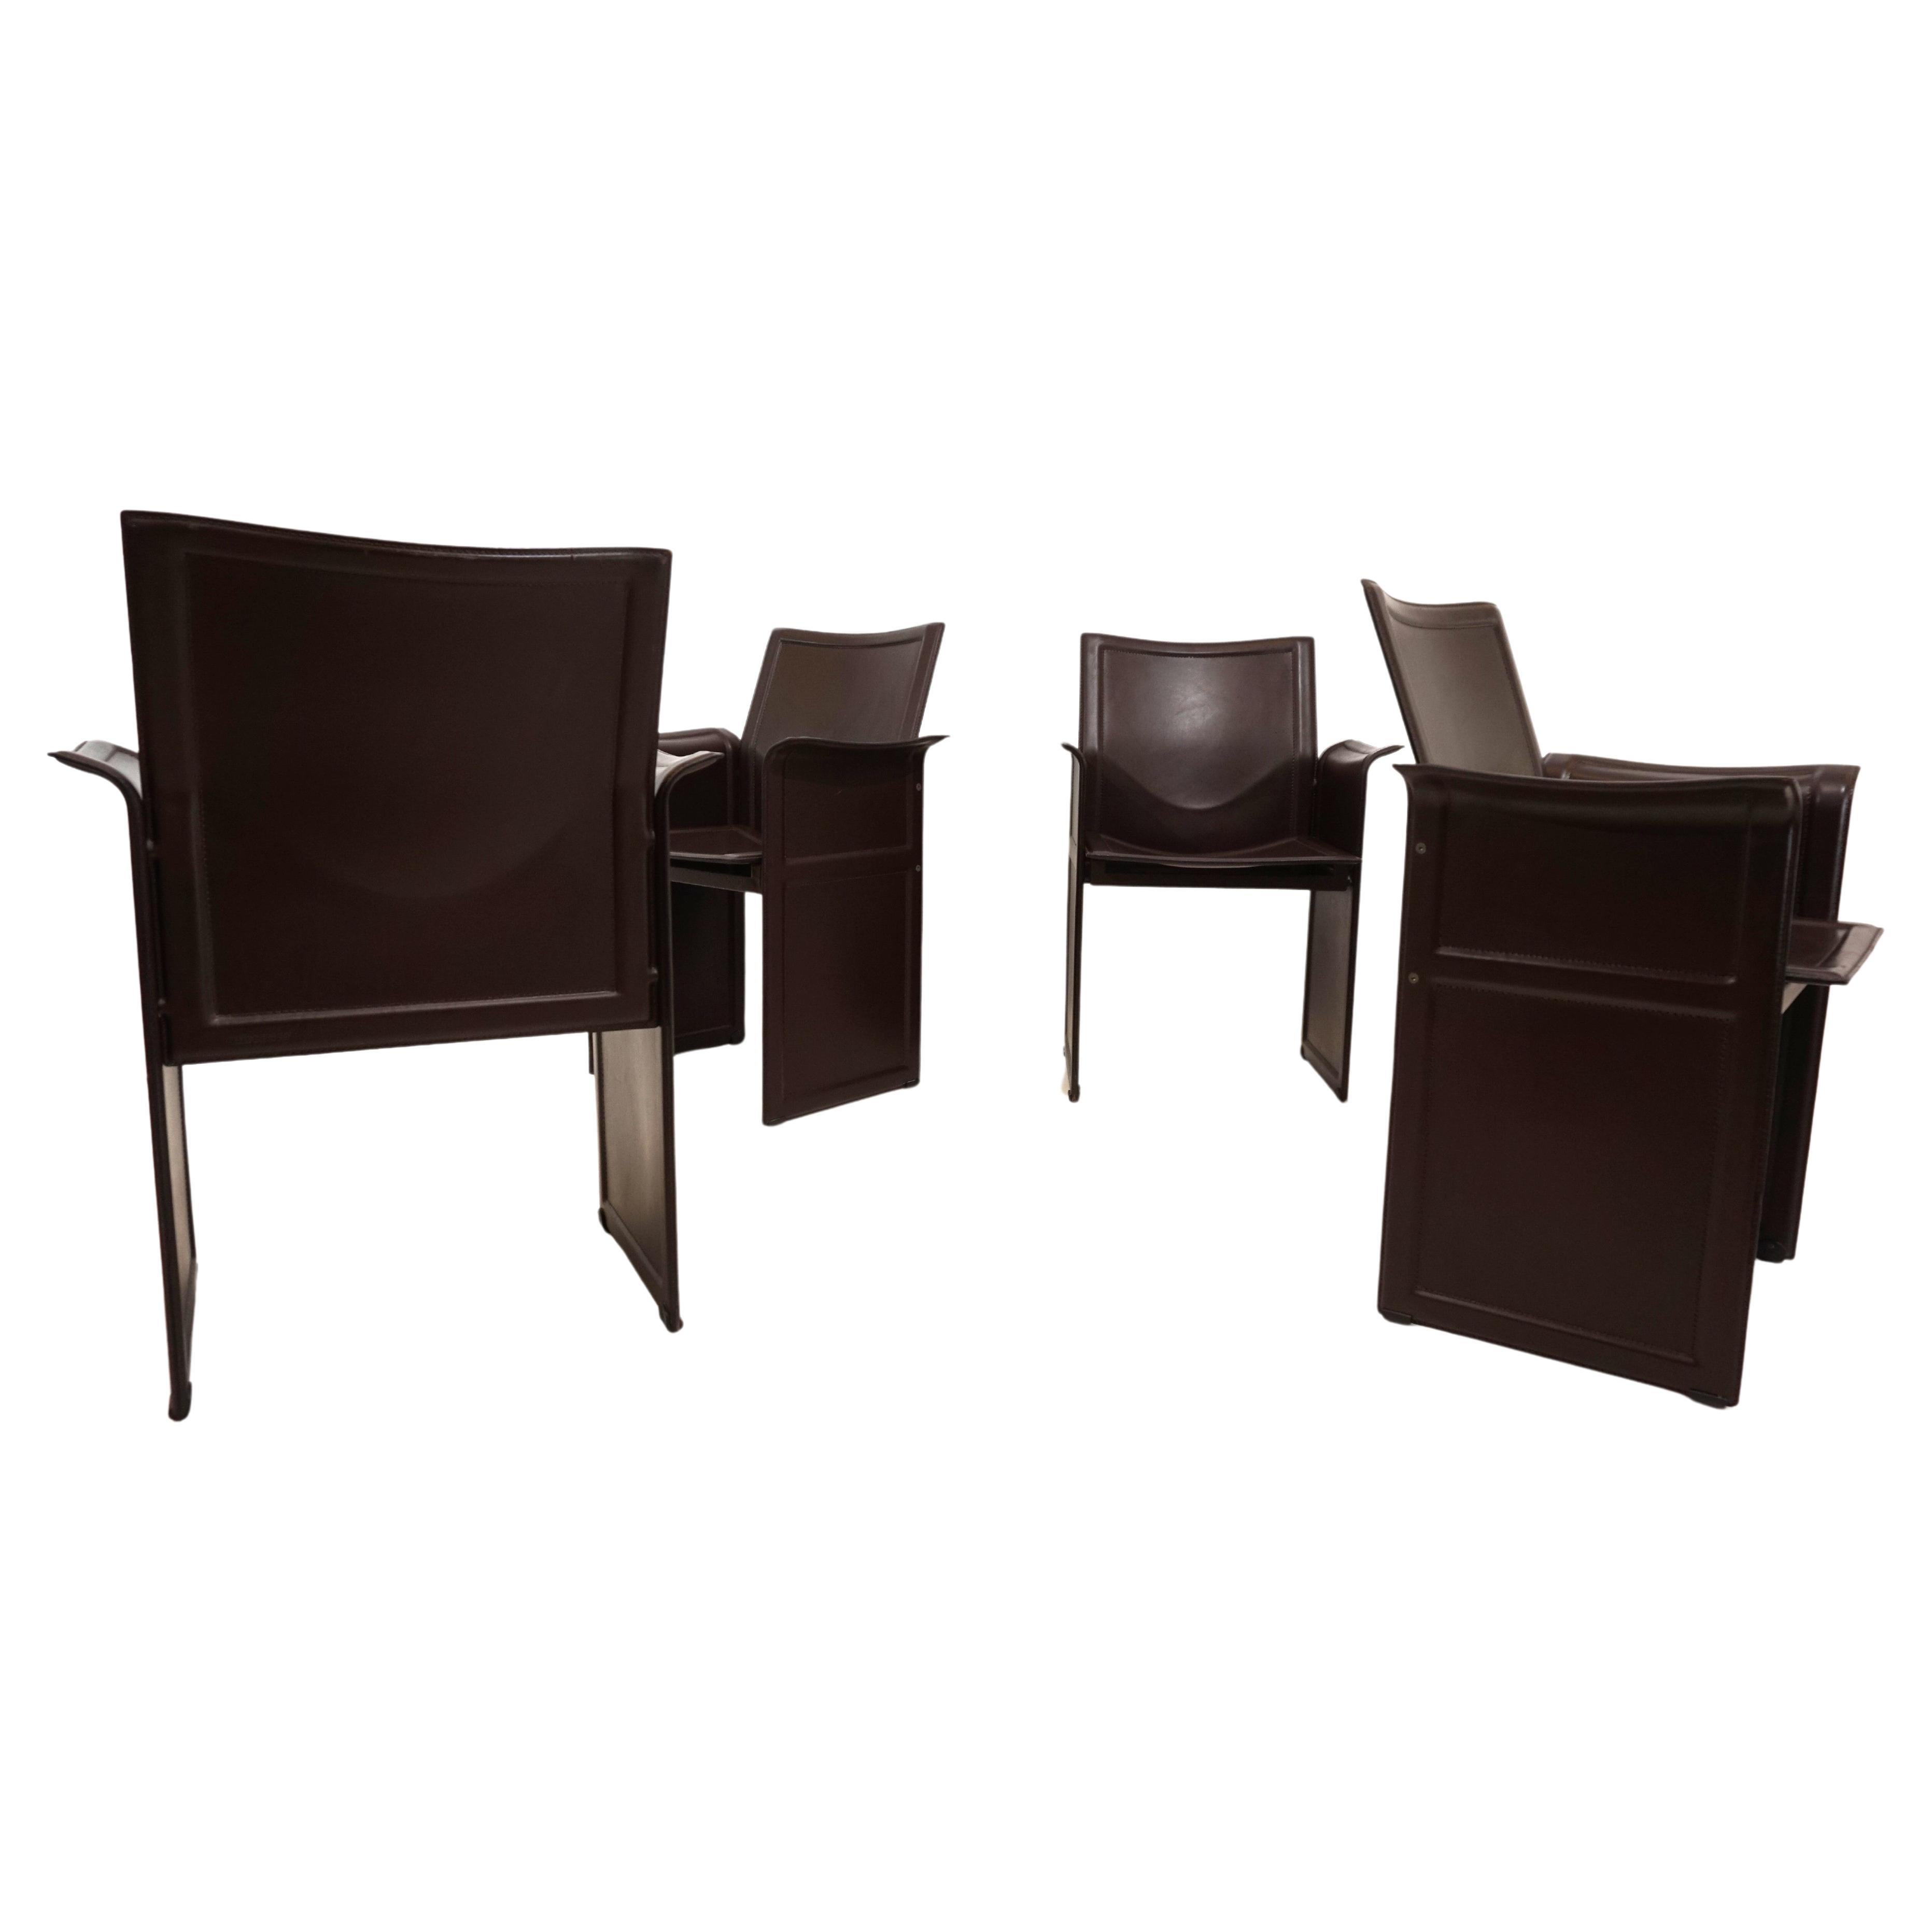 Set of 4 Matteo Grassi Korium dining/conference chairs by Tito Agnoli